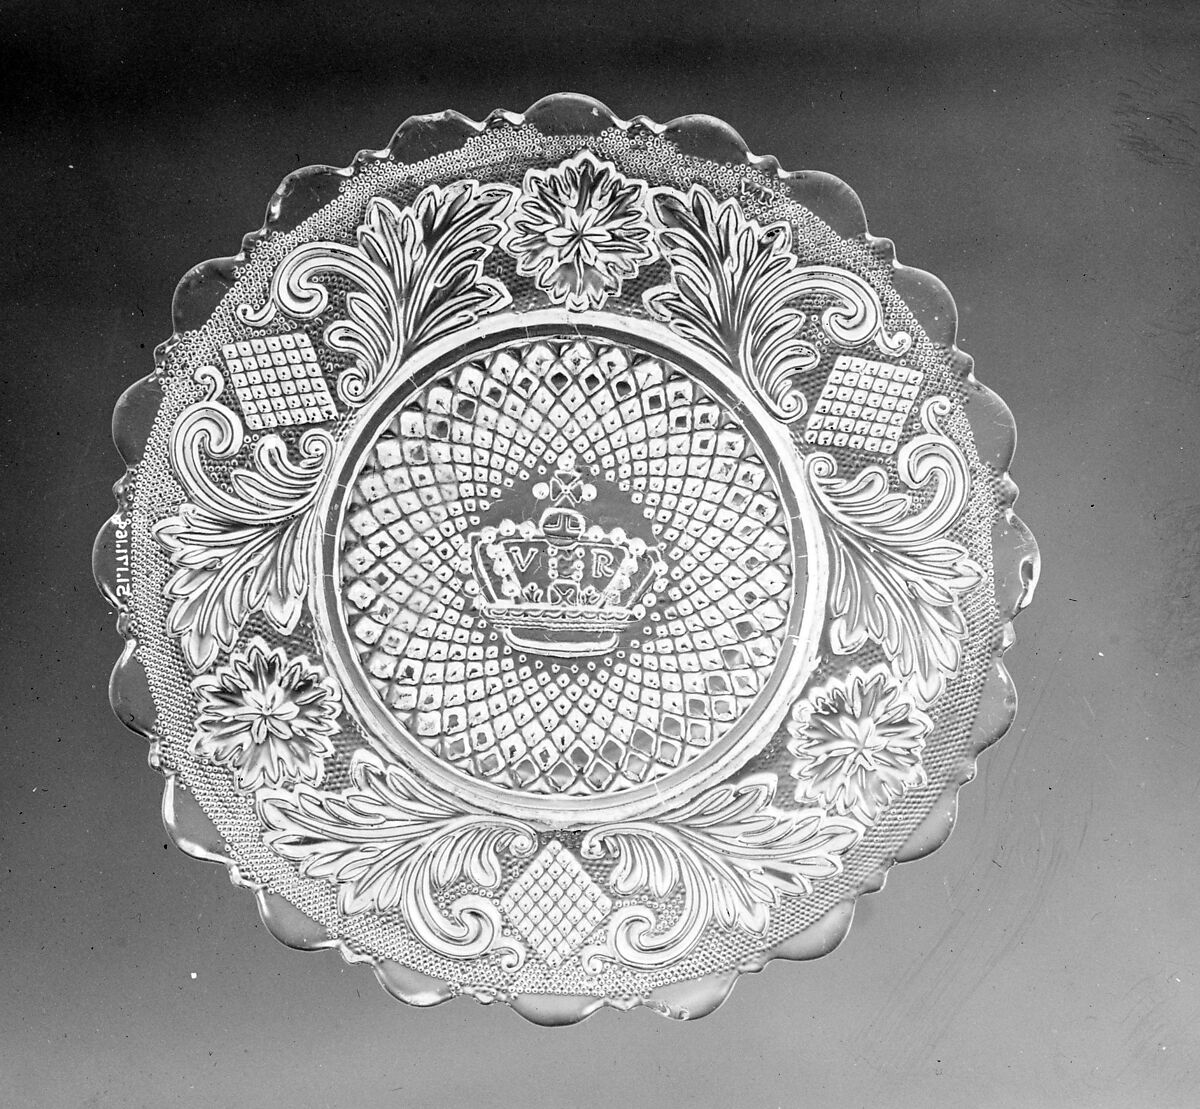 Plate, Lacy pressed glass, American or British 